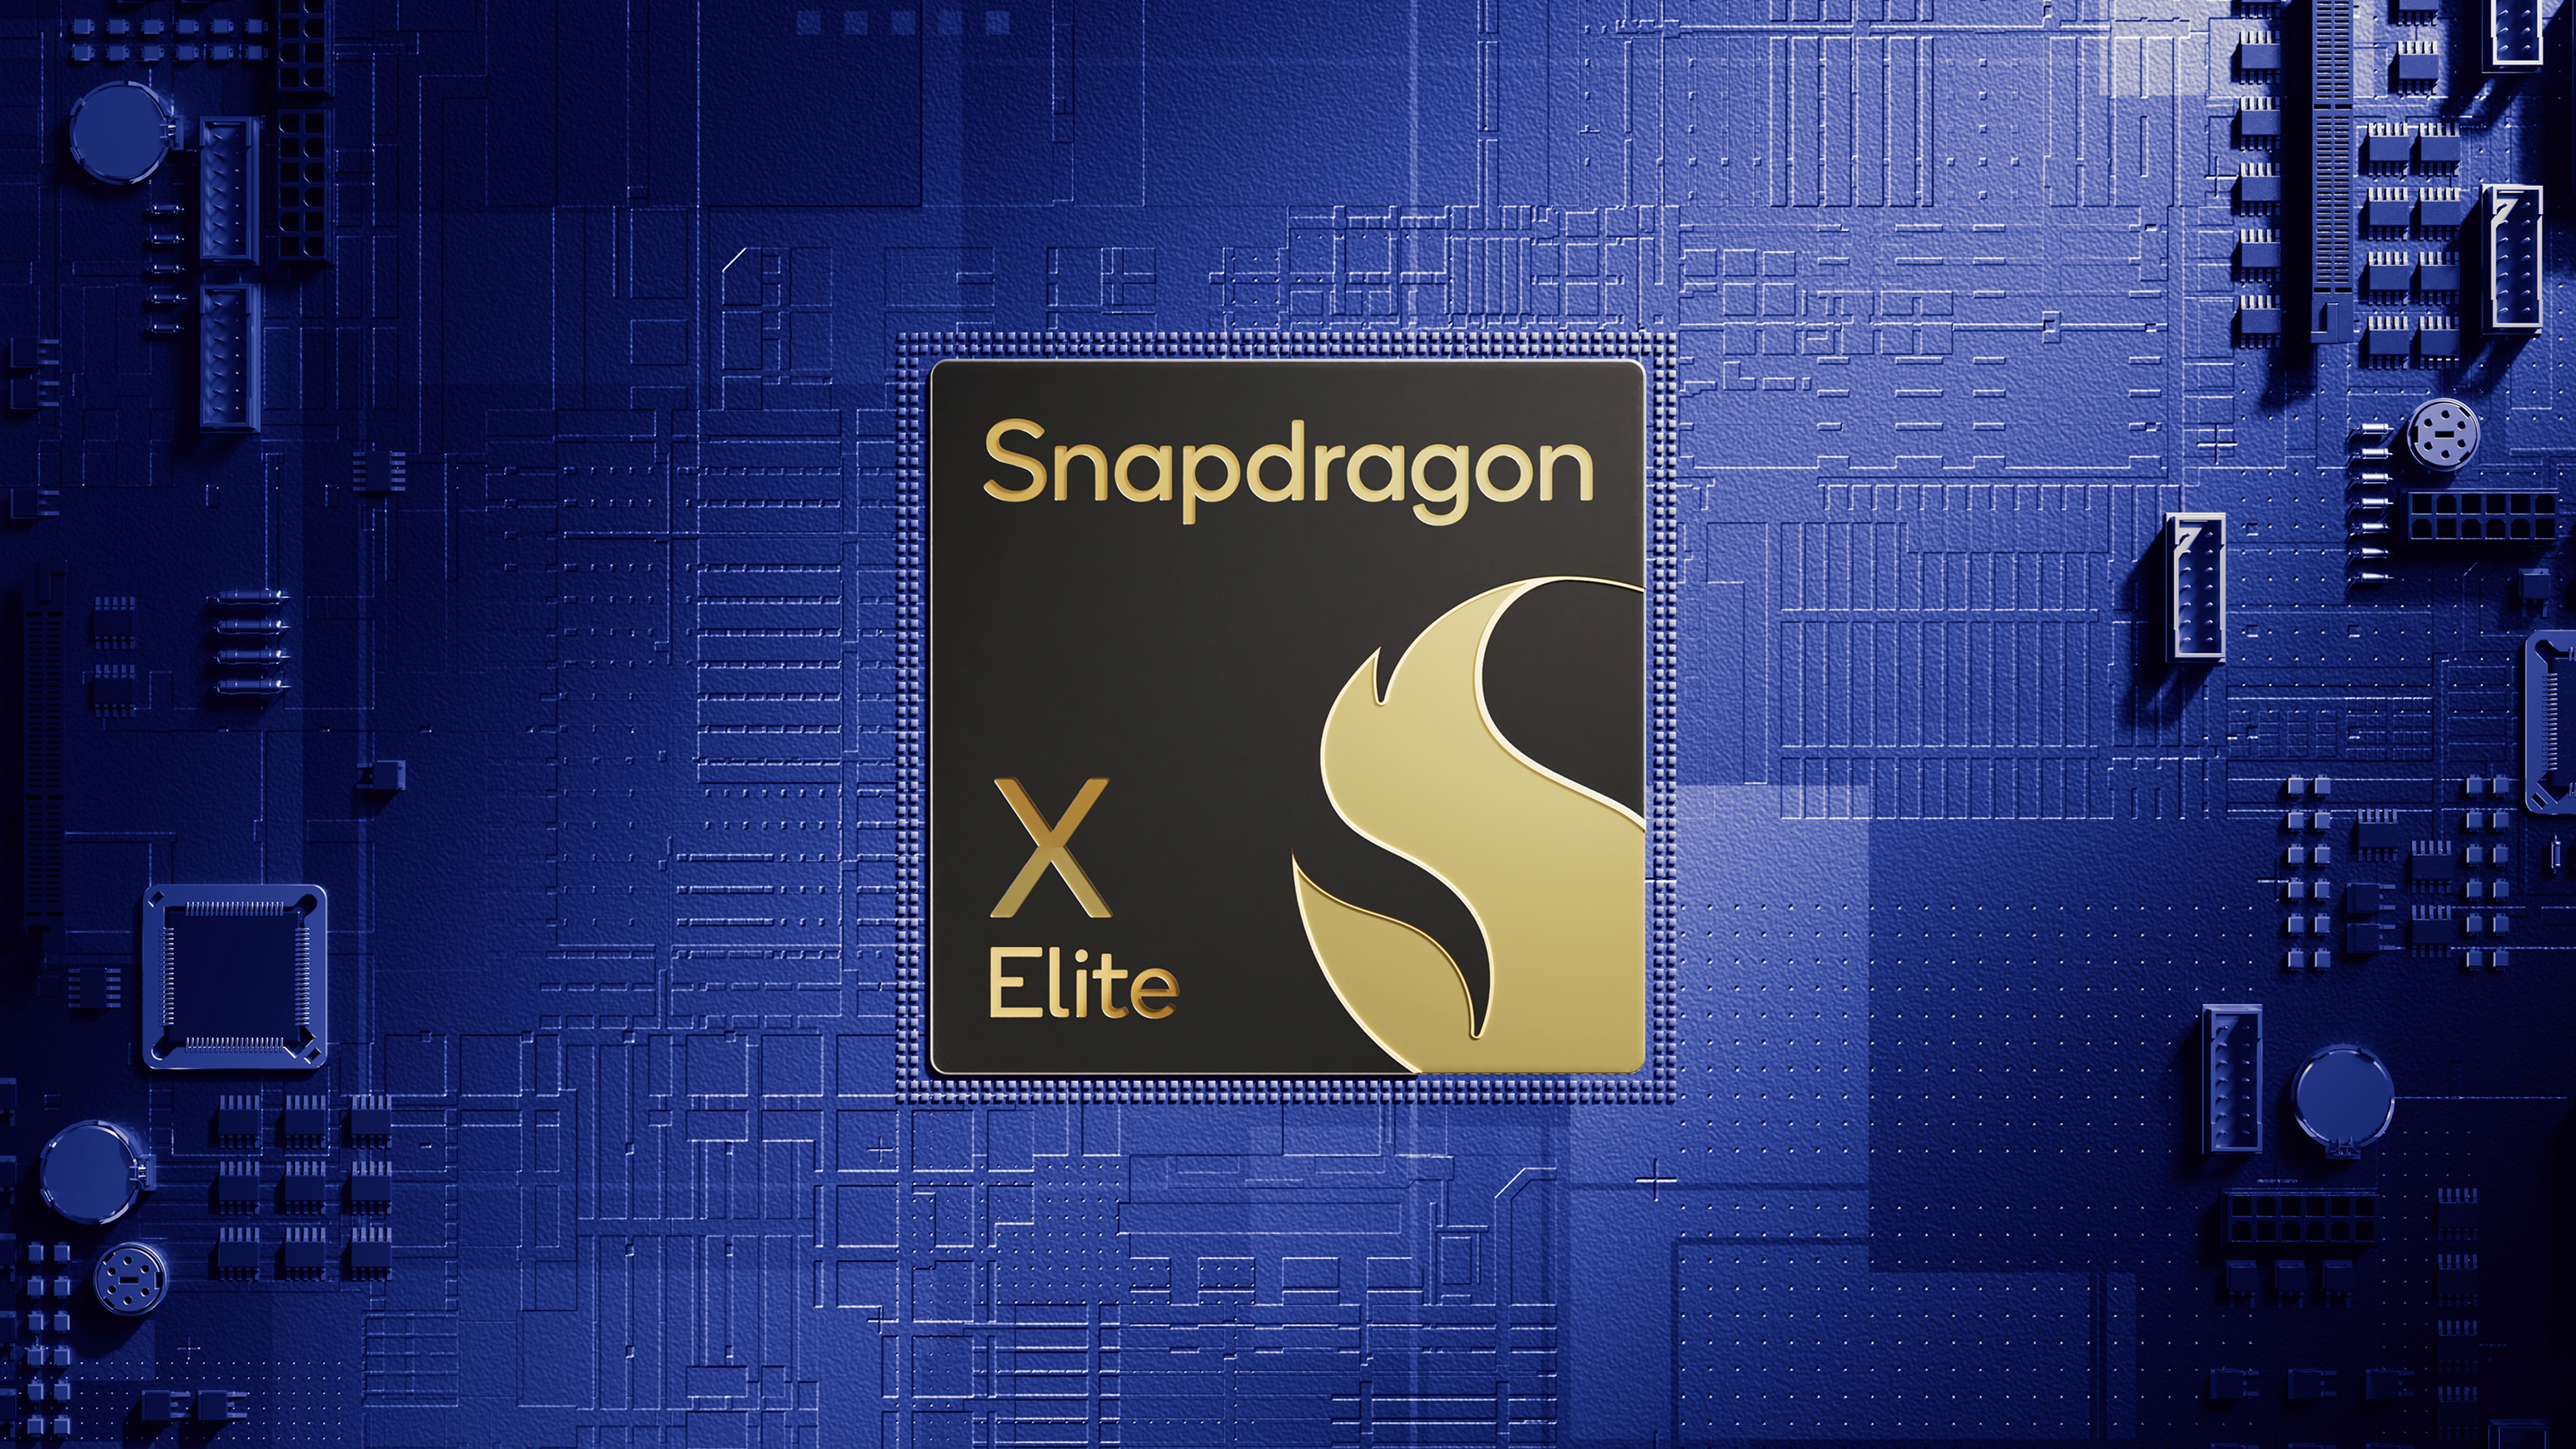 A rendering of Snapdragon X Elite chip